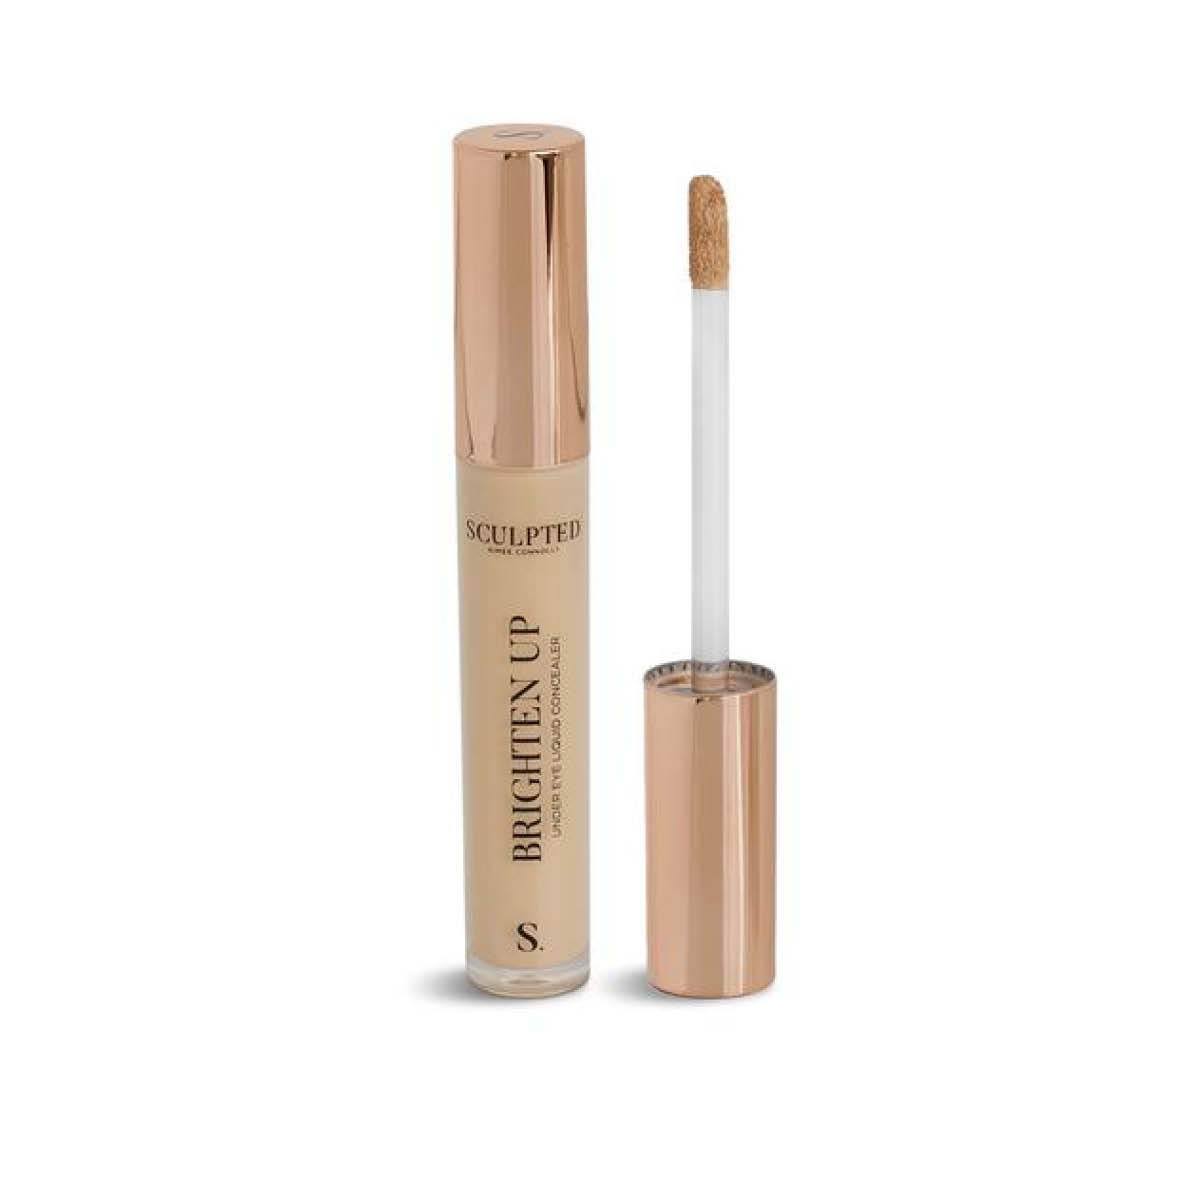 Sculpted By Aimee Connolly Brighten Up Concealer Cocoa